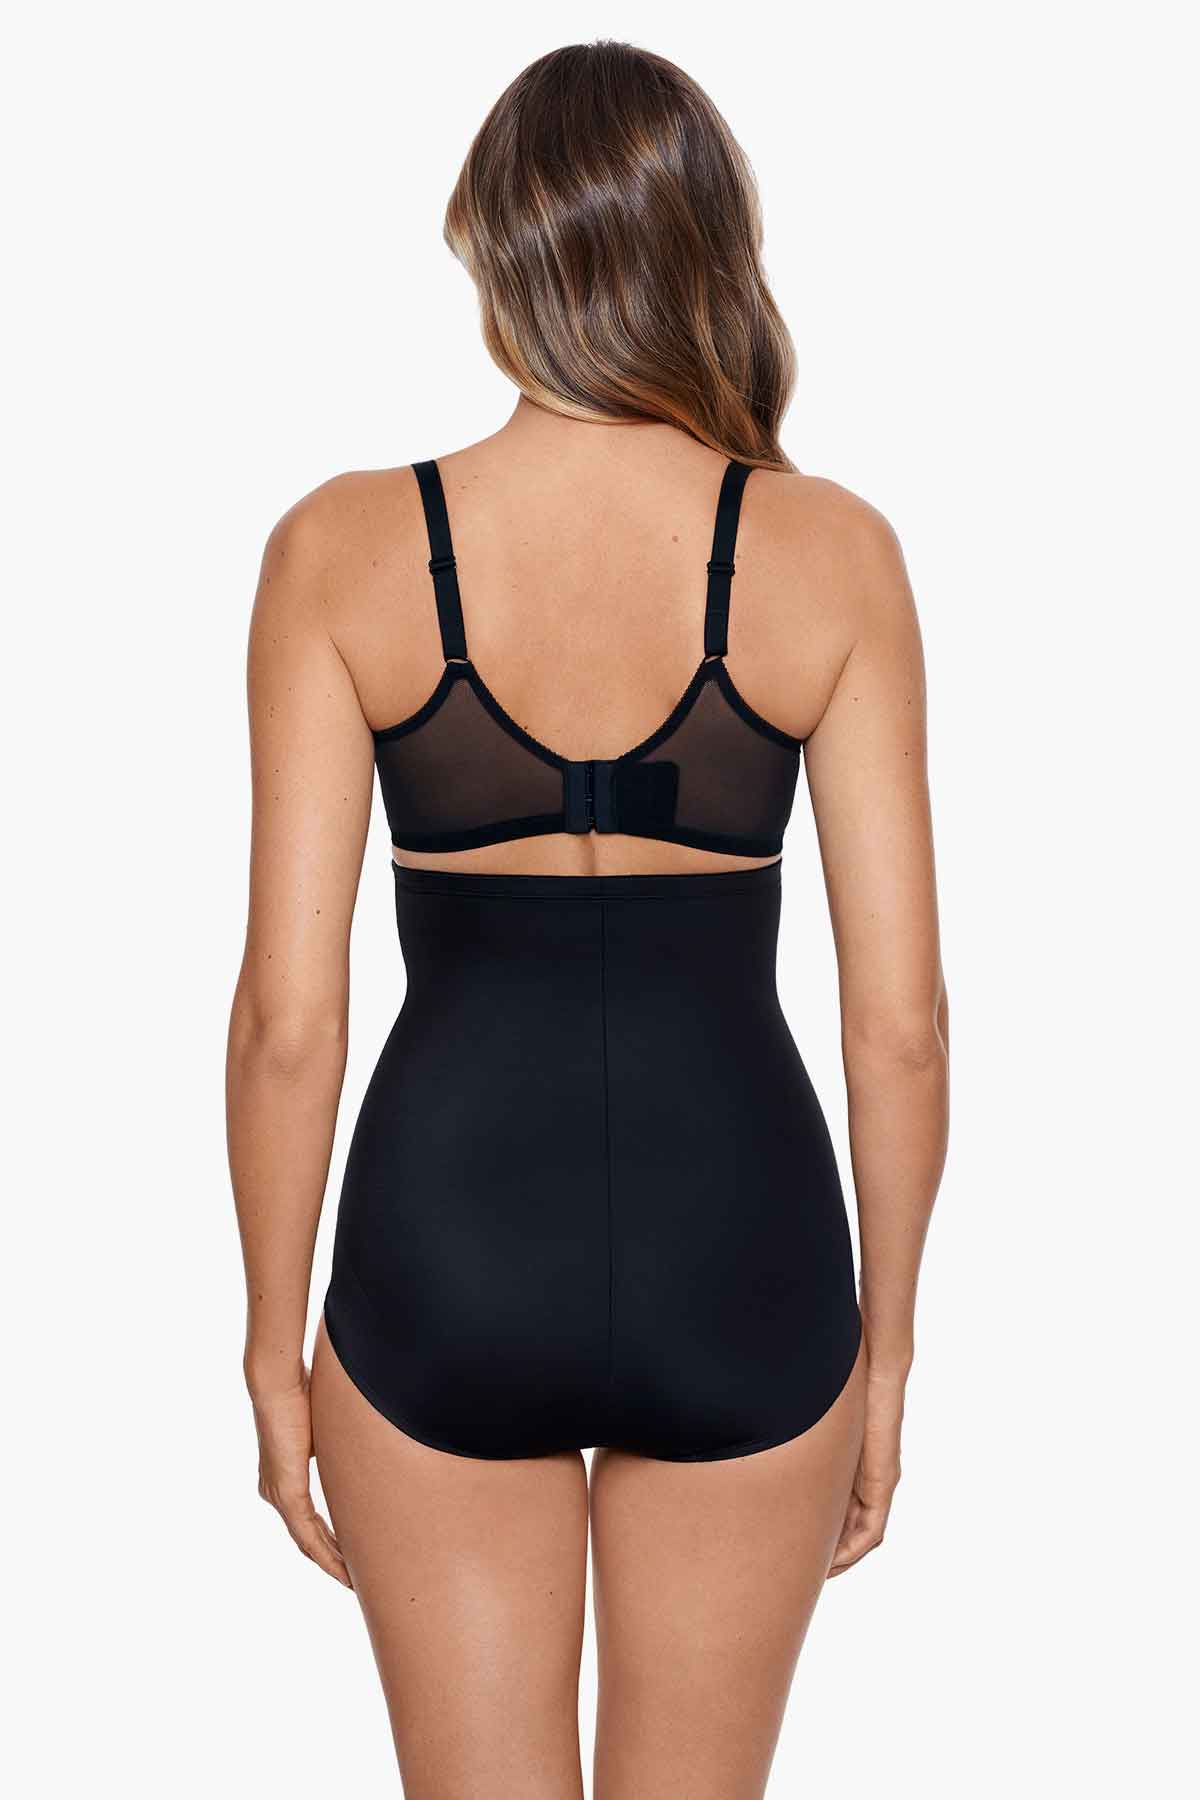 Miraclesuit Comfy Curves Body Briefer Black L (Women's 12-14) at